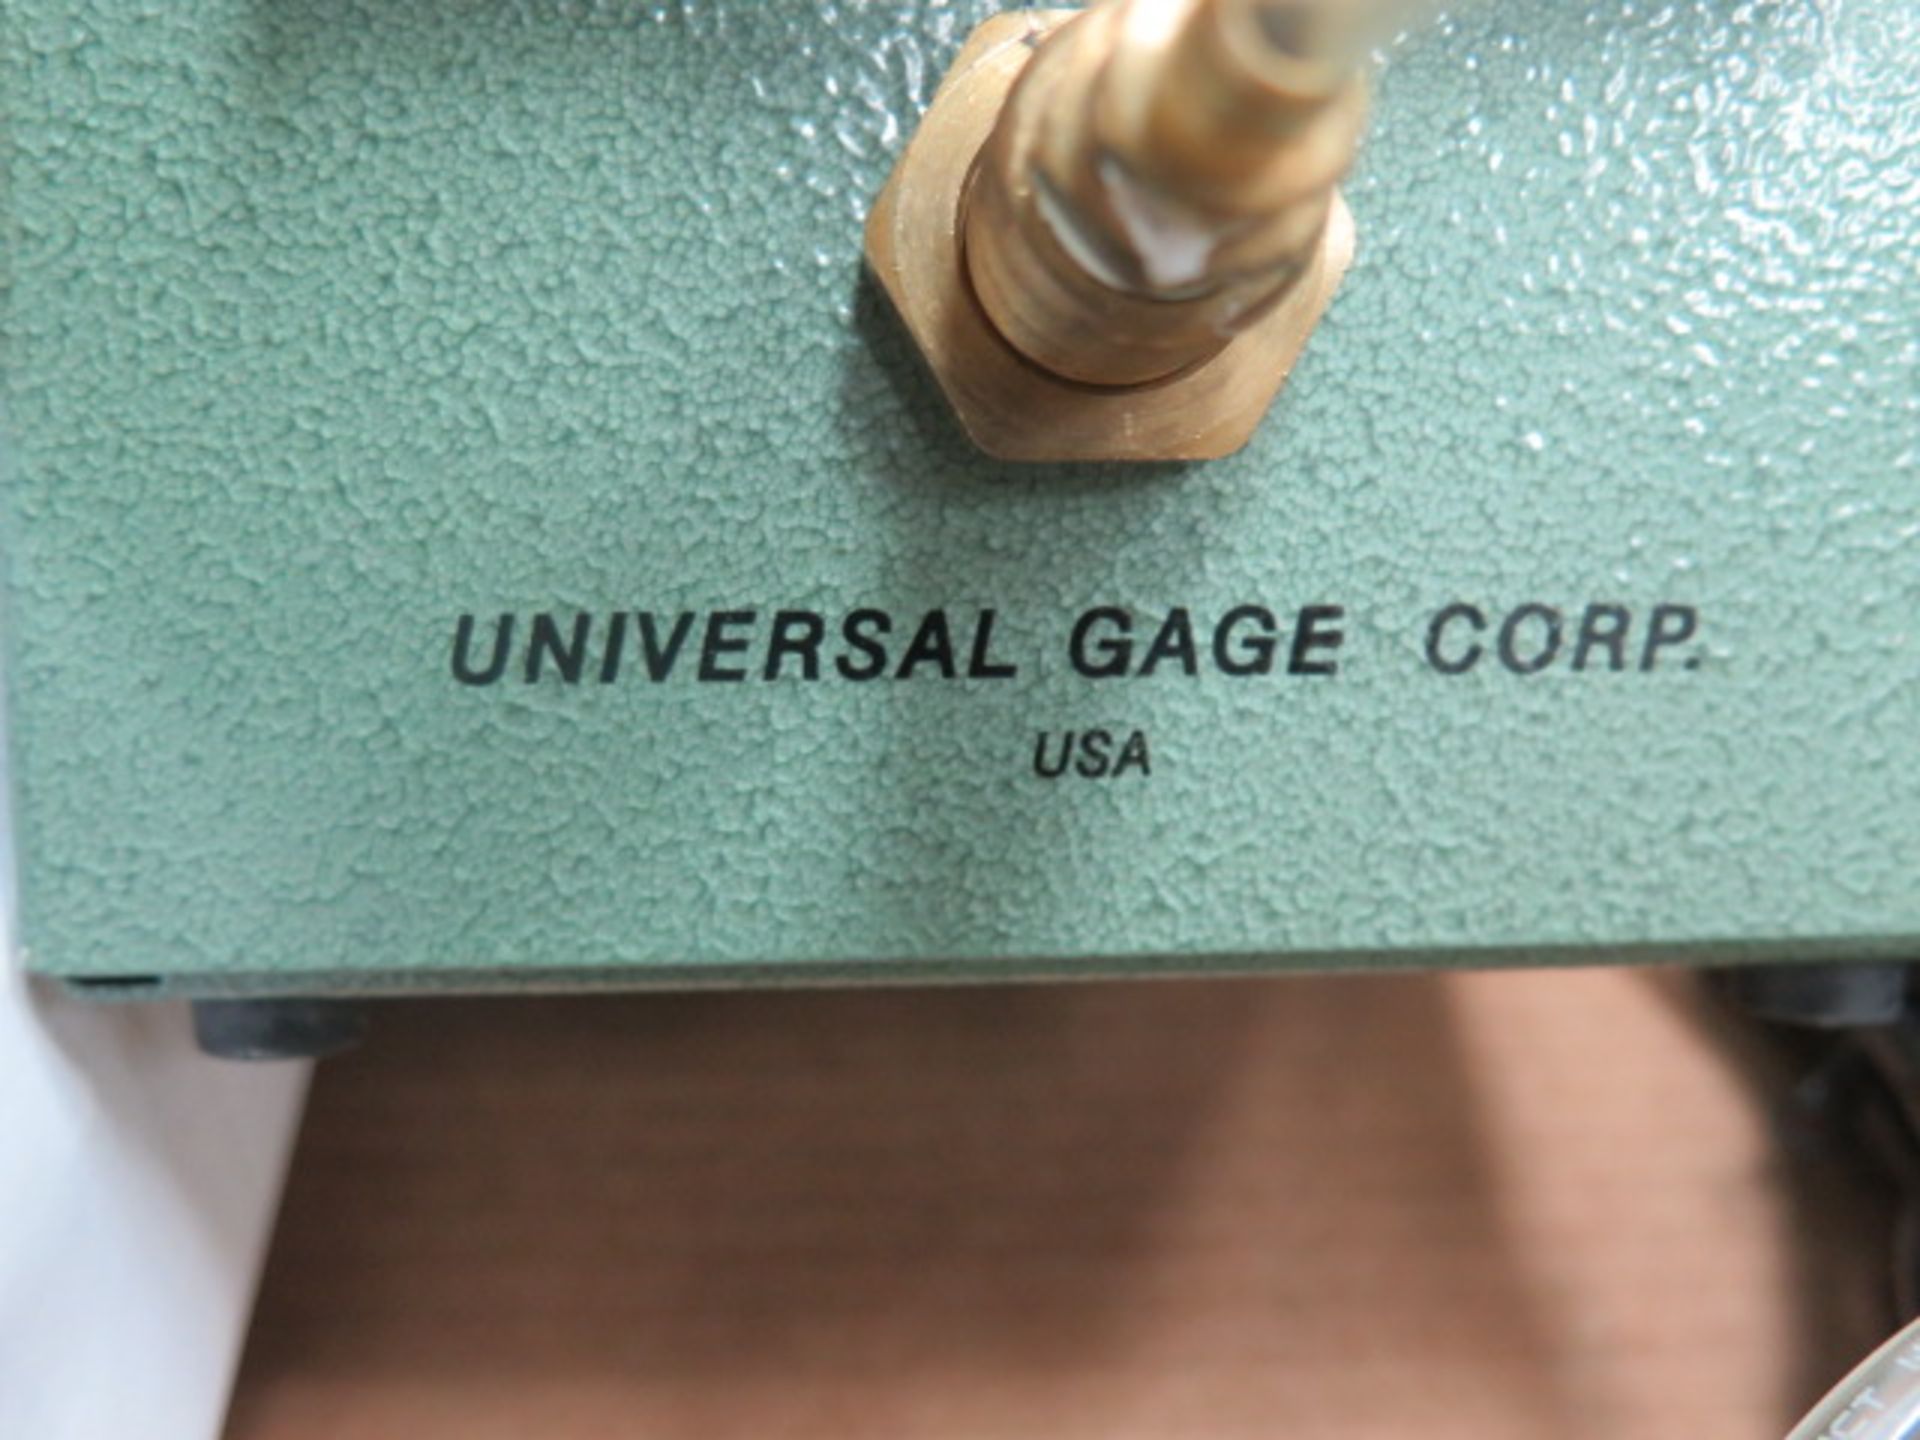 Universal Gage Corp mdl. DR-1 Universal Digital Air Gage (SOLD AS-IS - NO WARRANTY) - Image 5 of 5